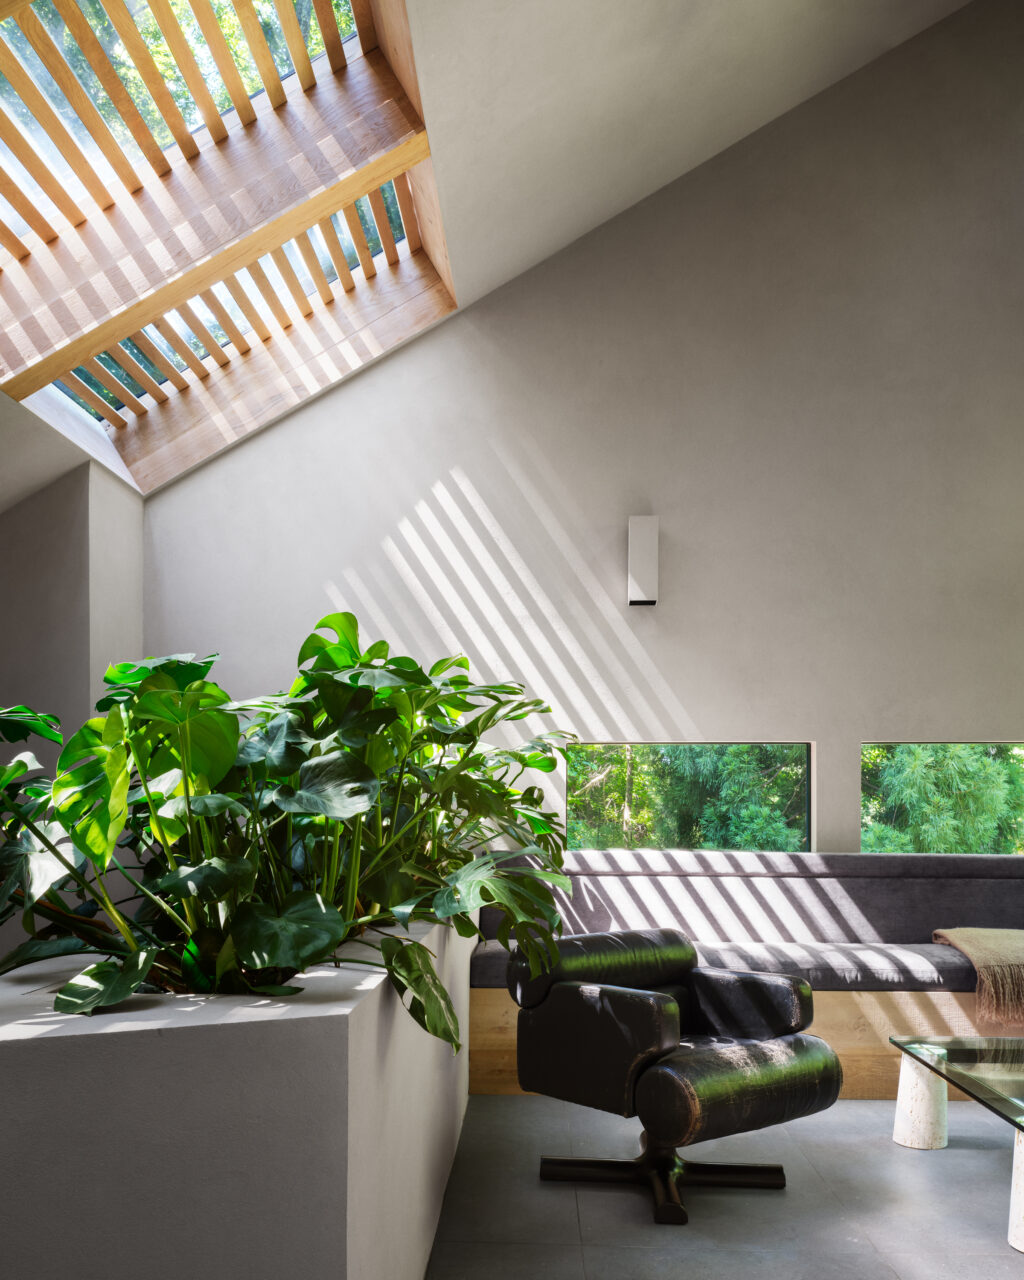 Light shines into a room via the skylight fitted with wooden slats